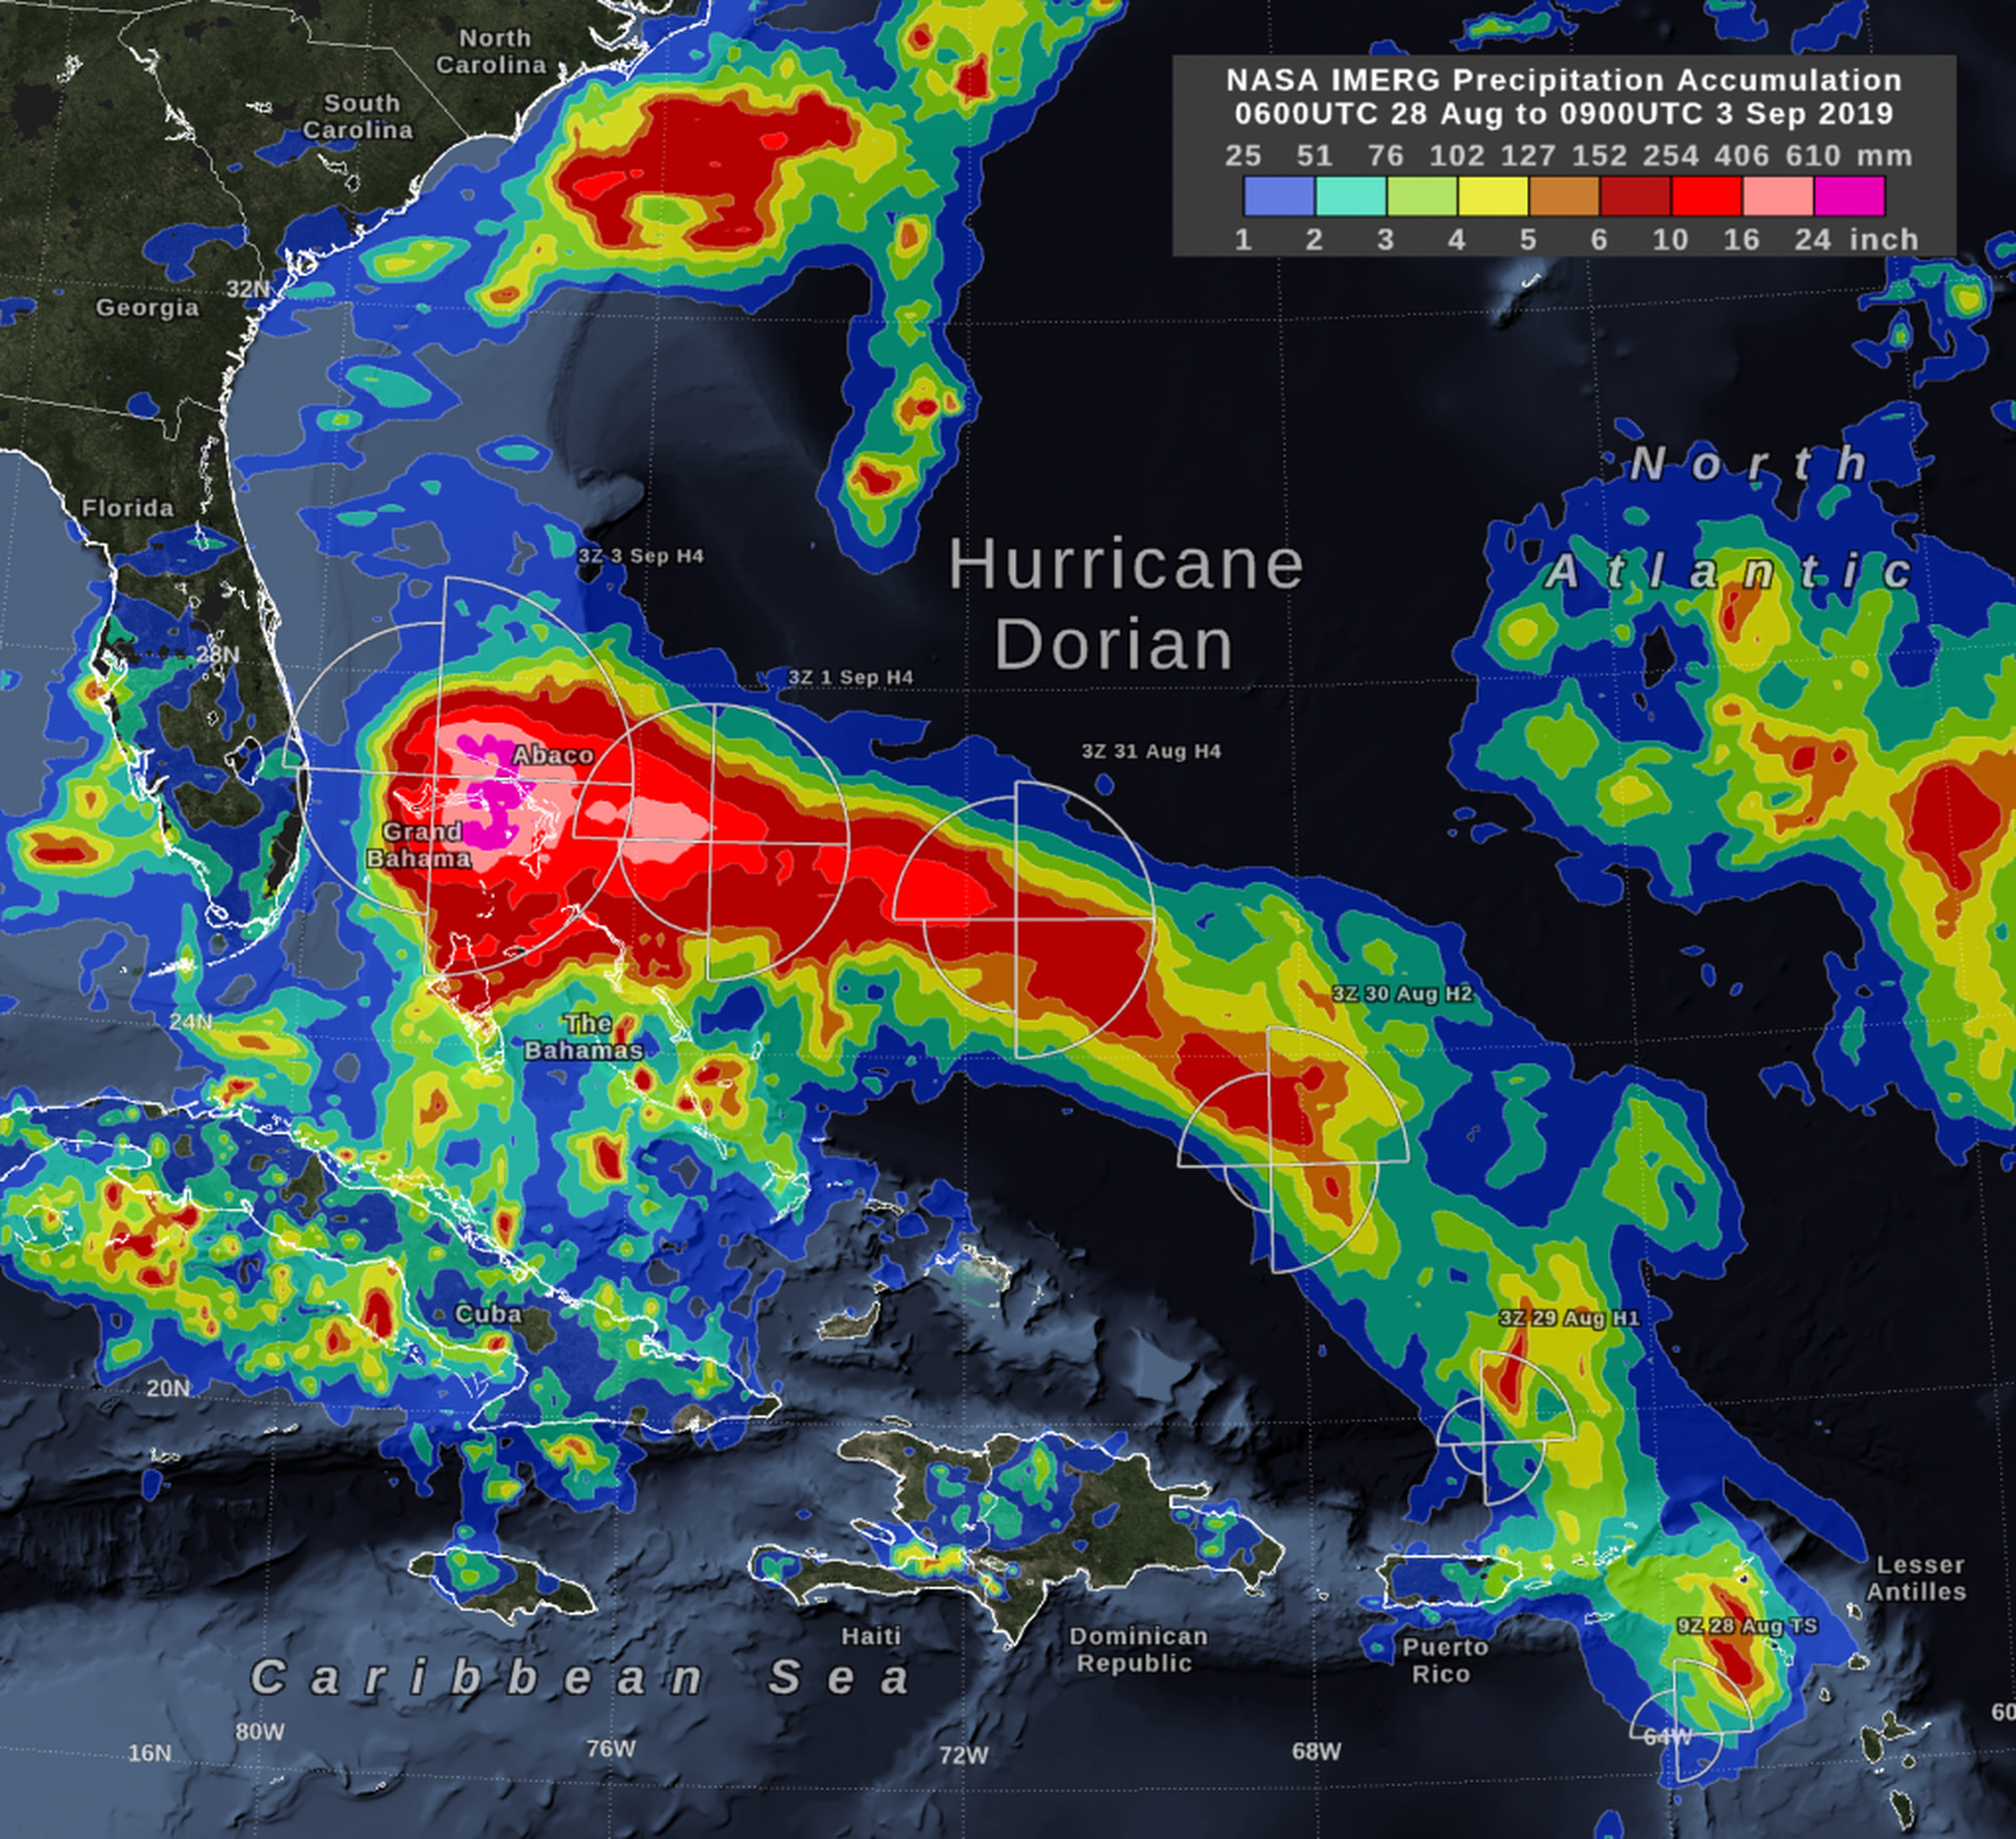 NASA estimates of rainfall from Dorian between August 28th and September 3rd.